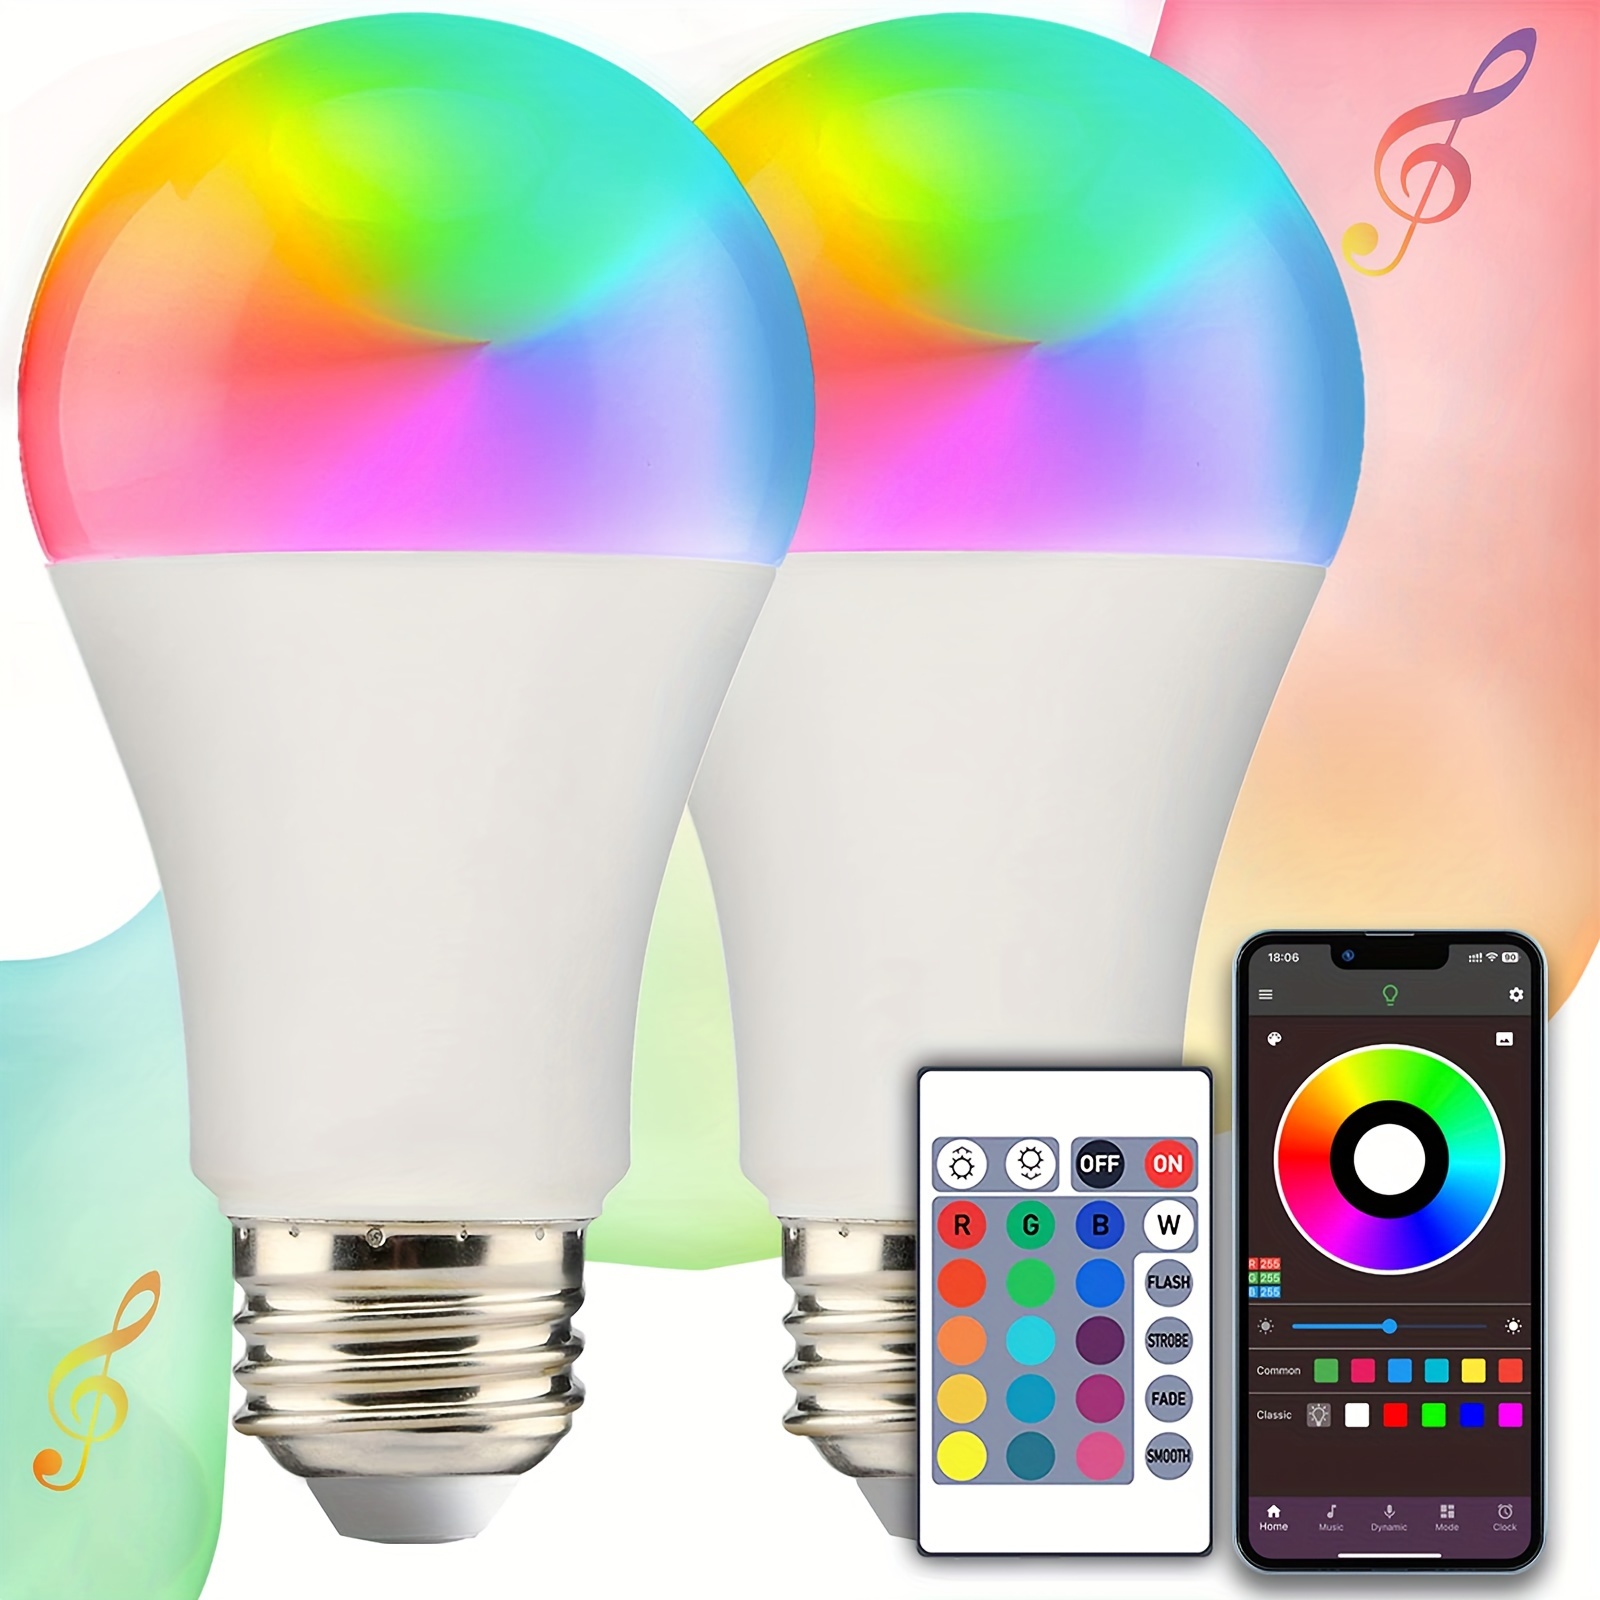 

E27 A19 Smart , Remote Control Light Bulb, 24key Remote And Smart App Control, Music Sync, Can Adjust Color And Brightness, Can Be Timed, Suitable For Room Decor, Party Decoration, Smart Home Lighting